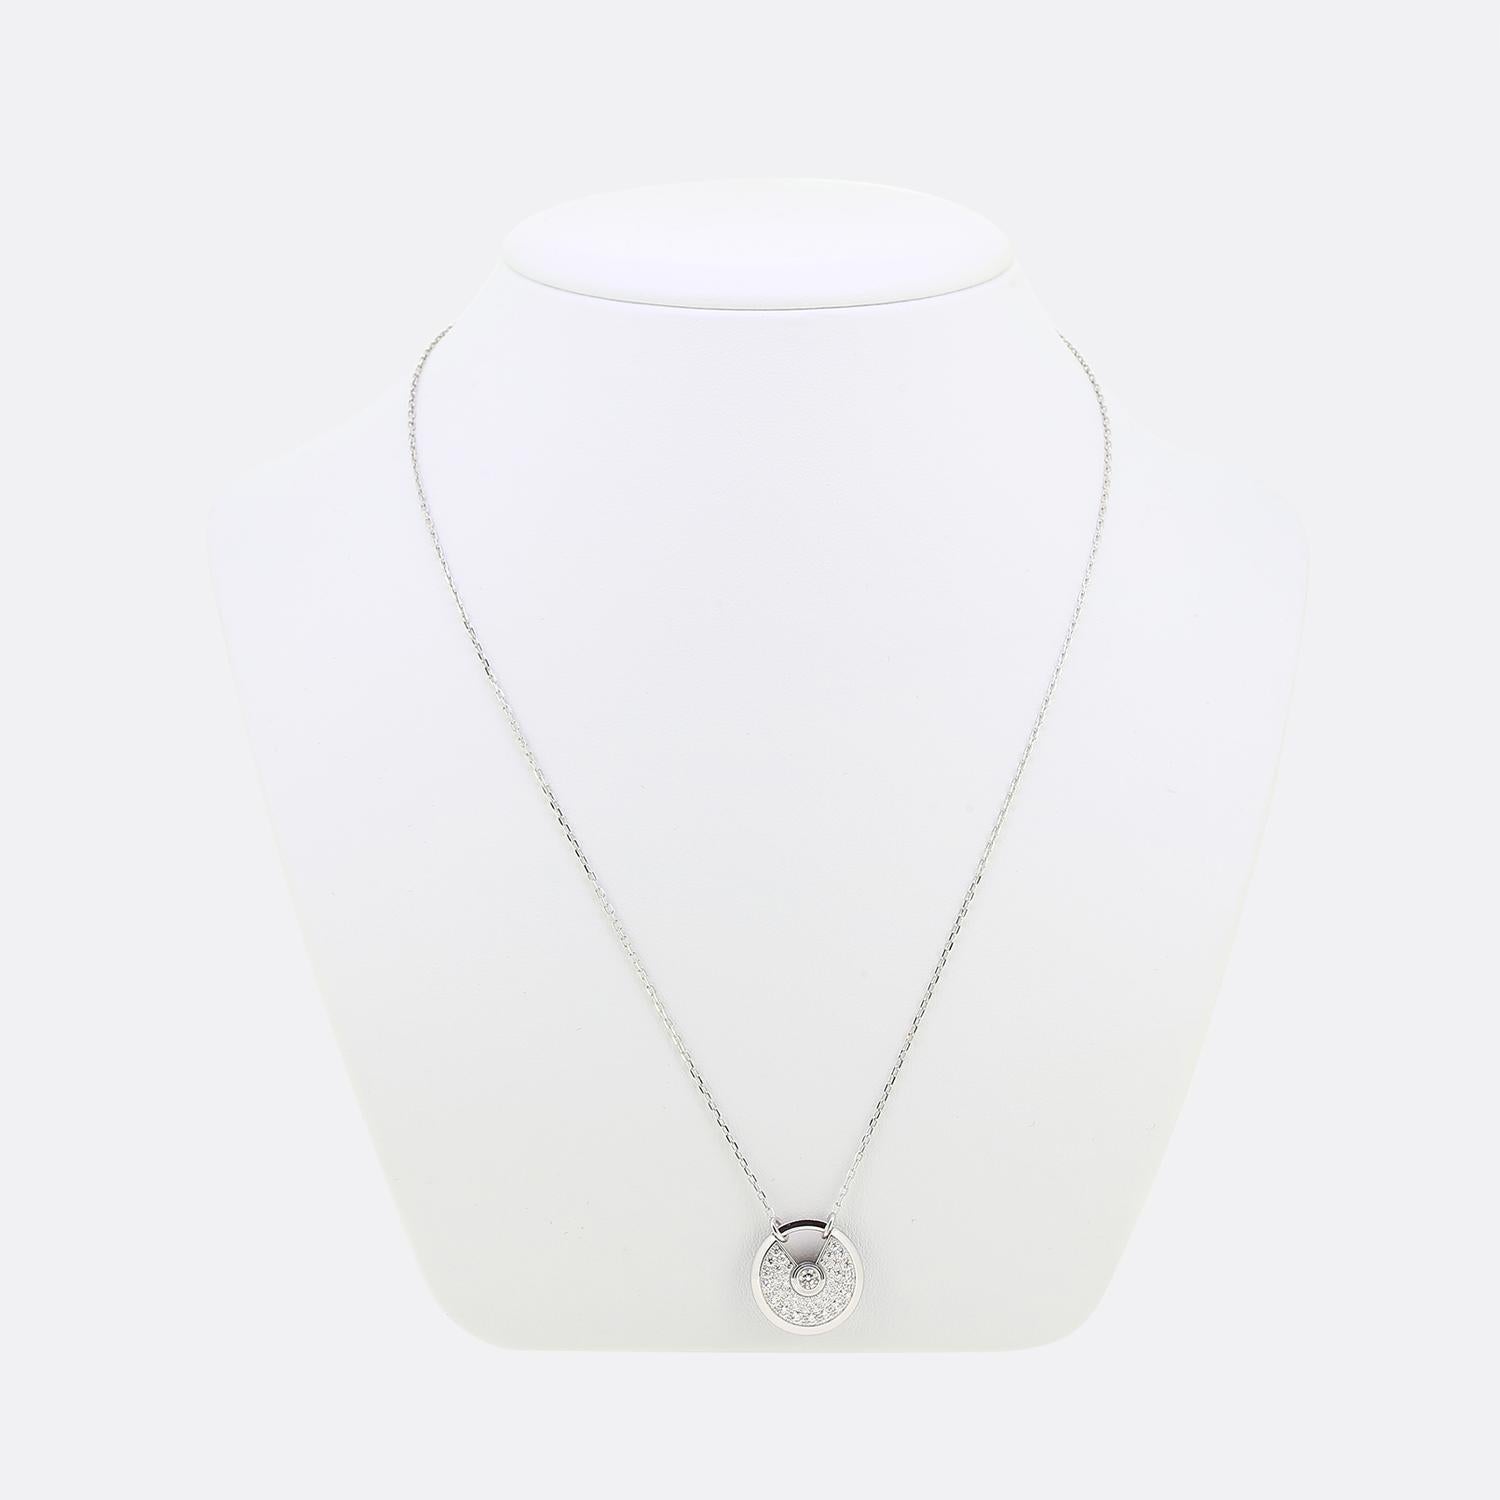 Here we have a delightful necklace from the world renowned jewellery house of Cartier. This pendant forms part of their iconic 'Amulette' collection and features a single round brilliant cut diamond atop a pavé diamond set backdrop with a padlock